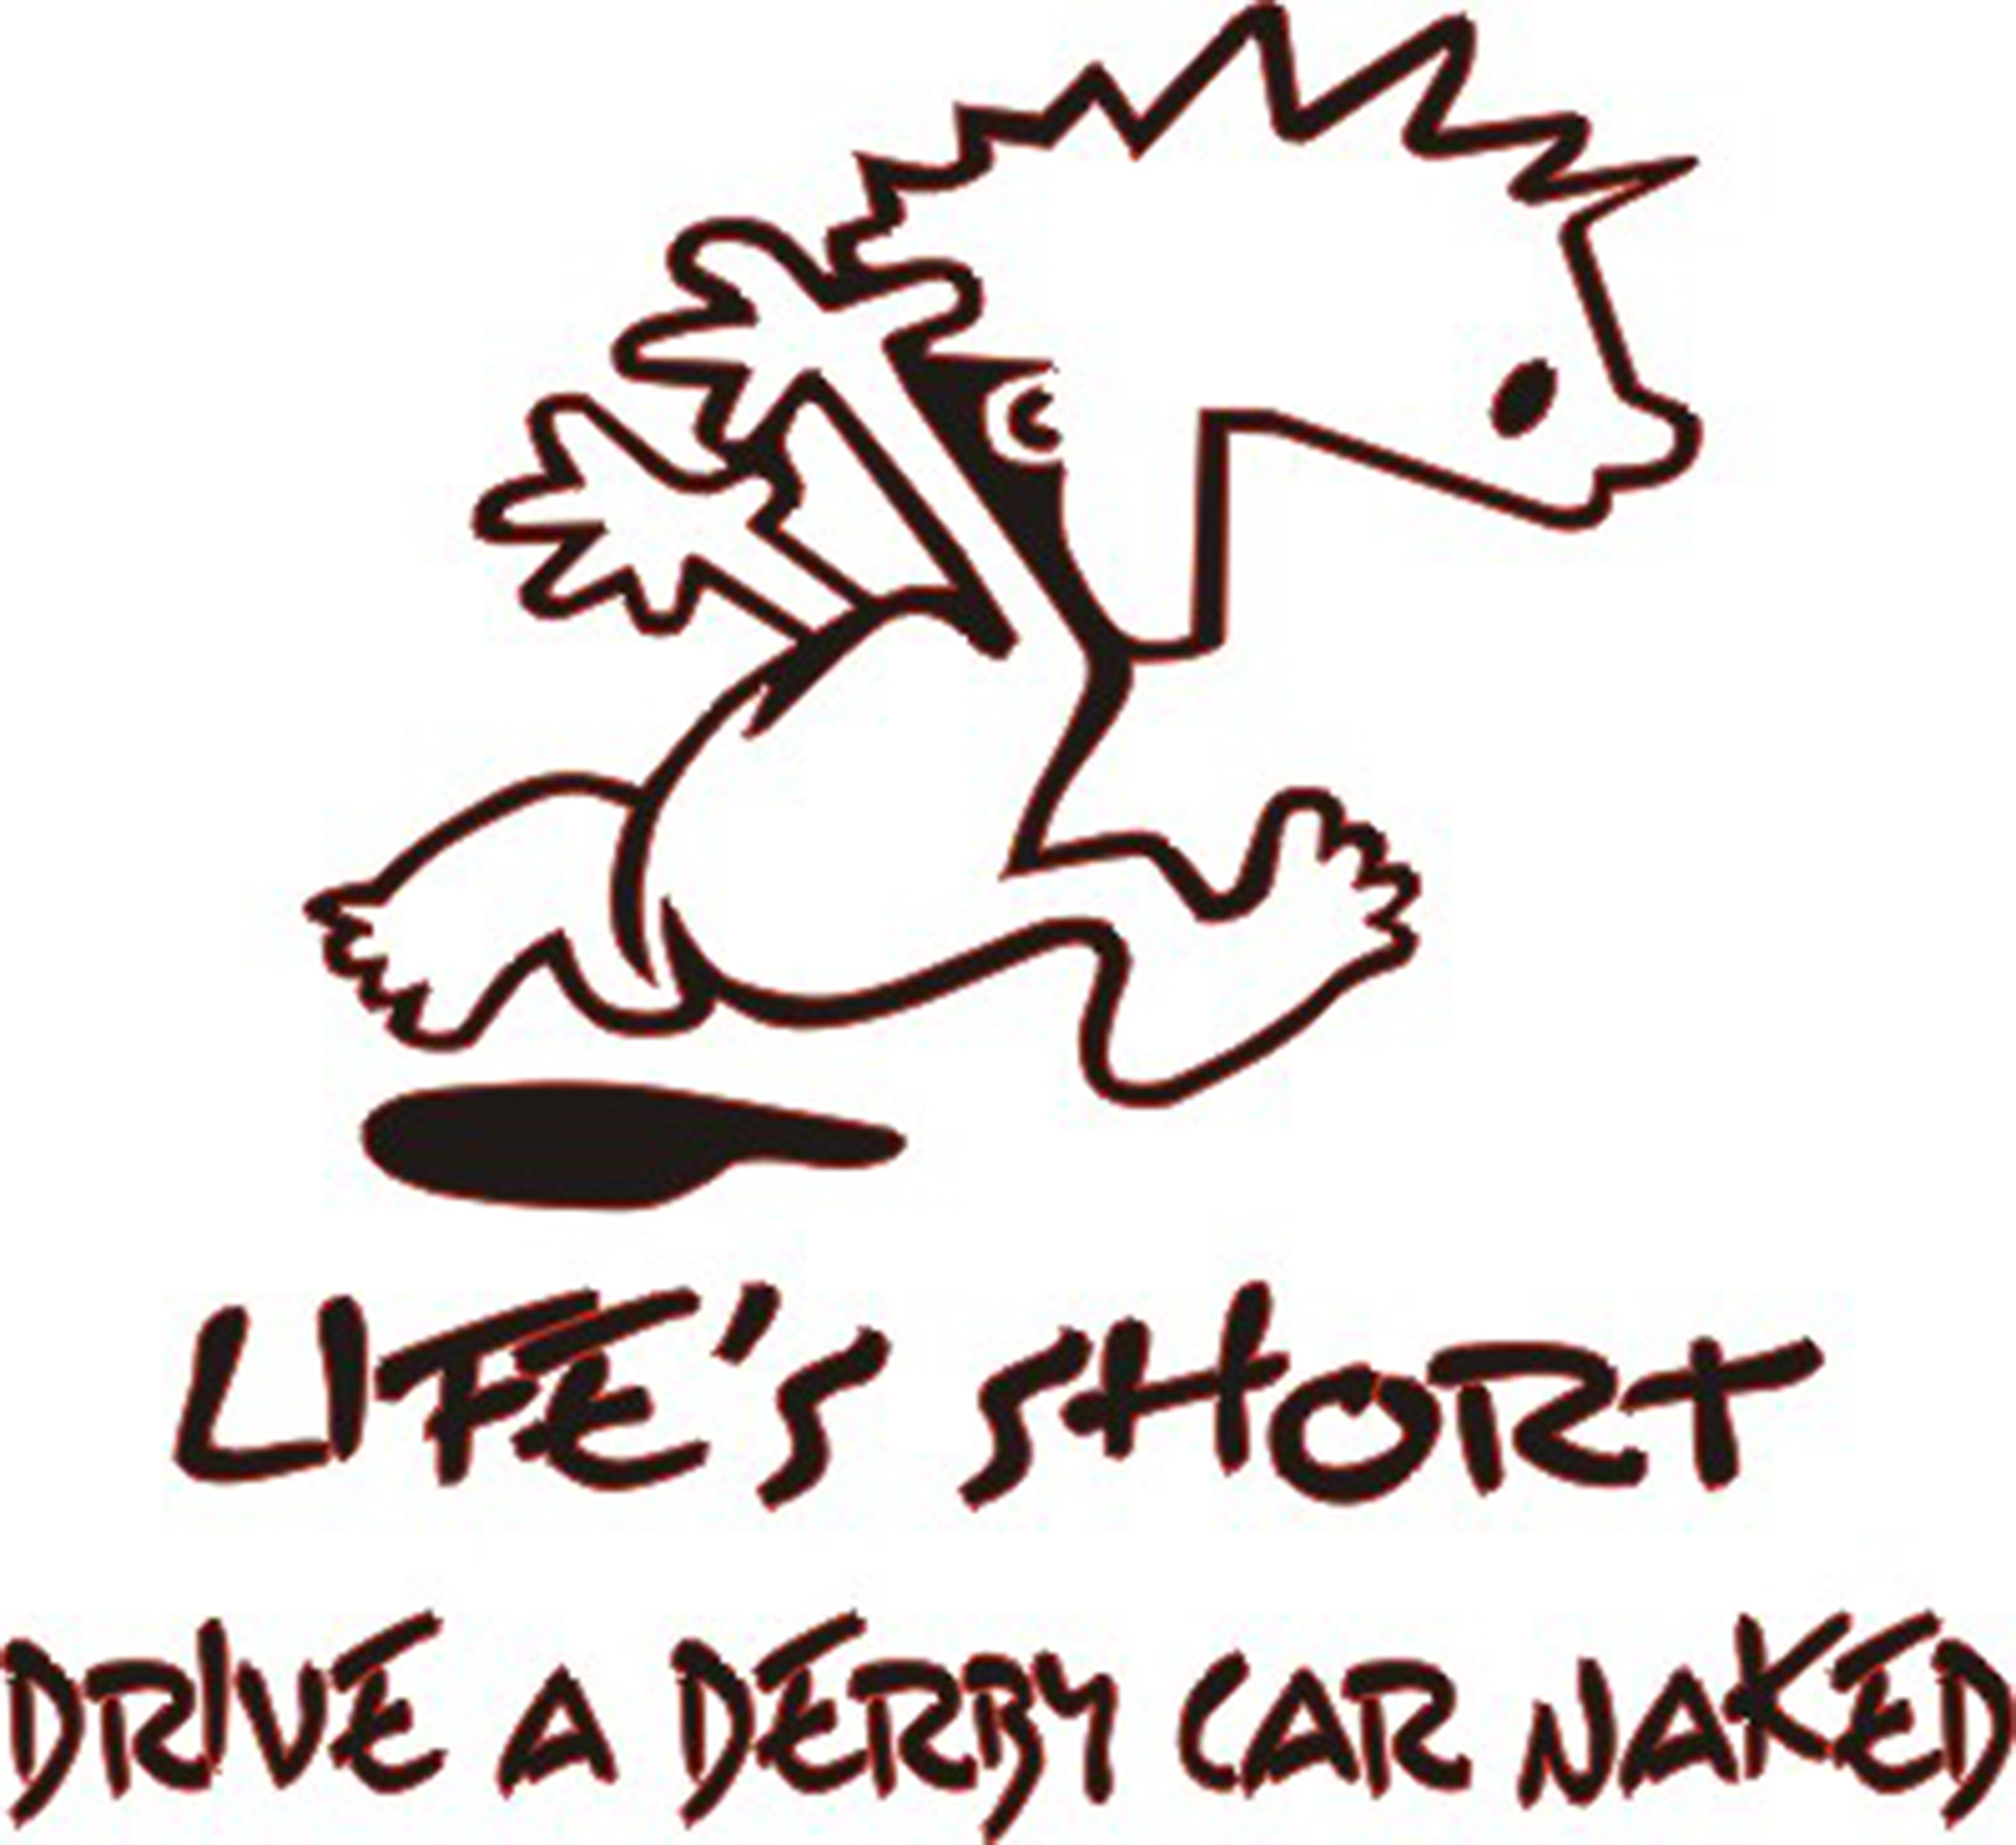 Lifes Short, Drive a Derby Car Naked Sticker